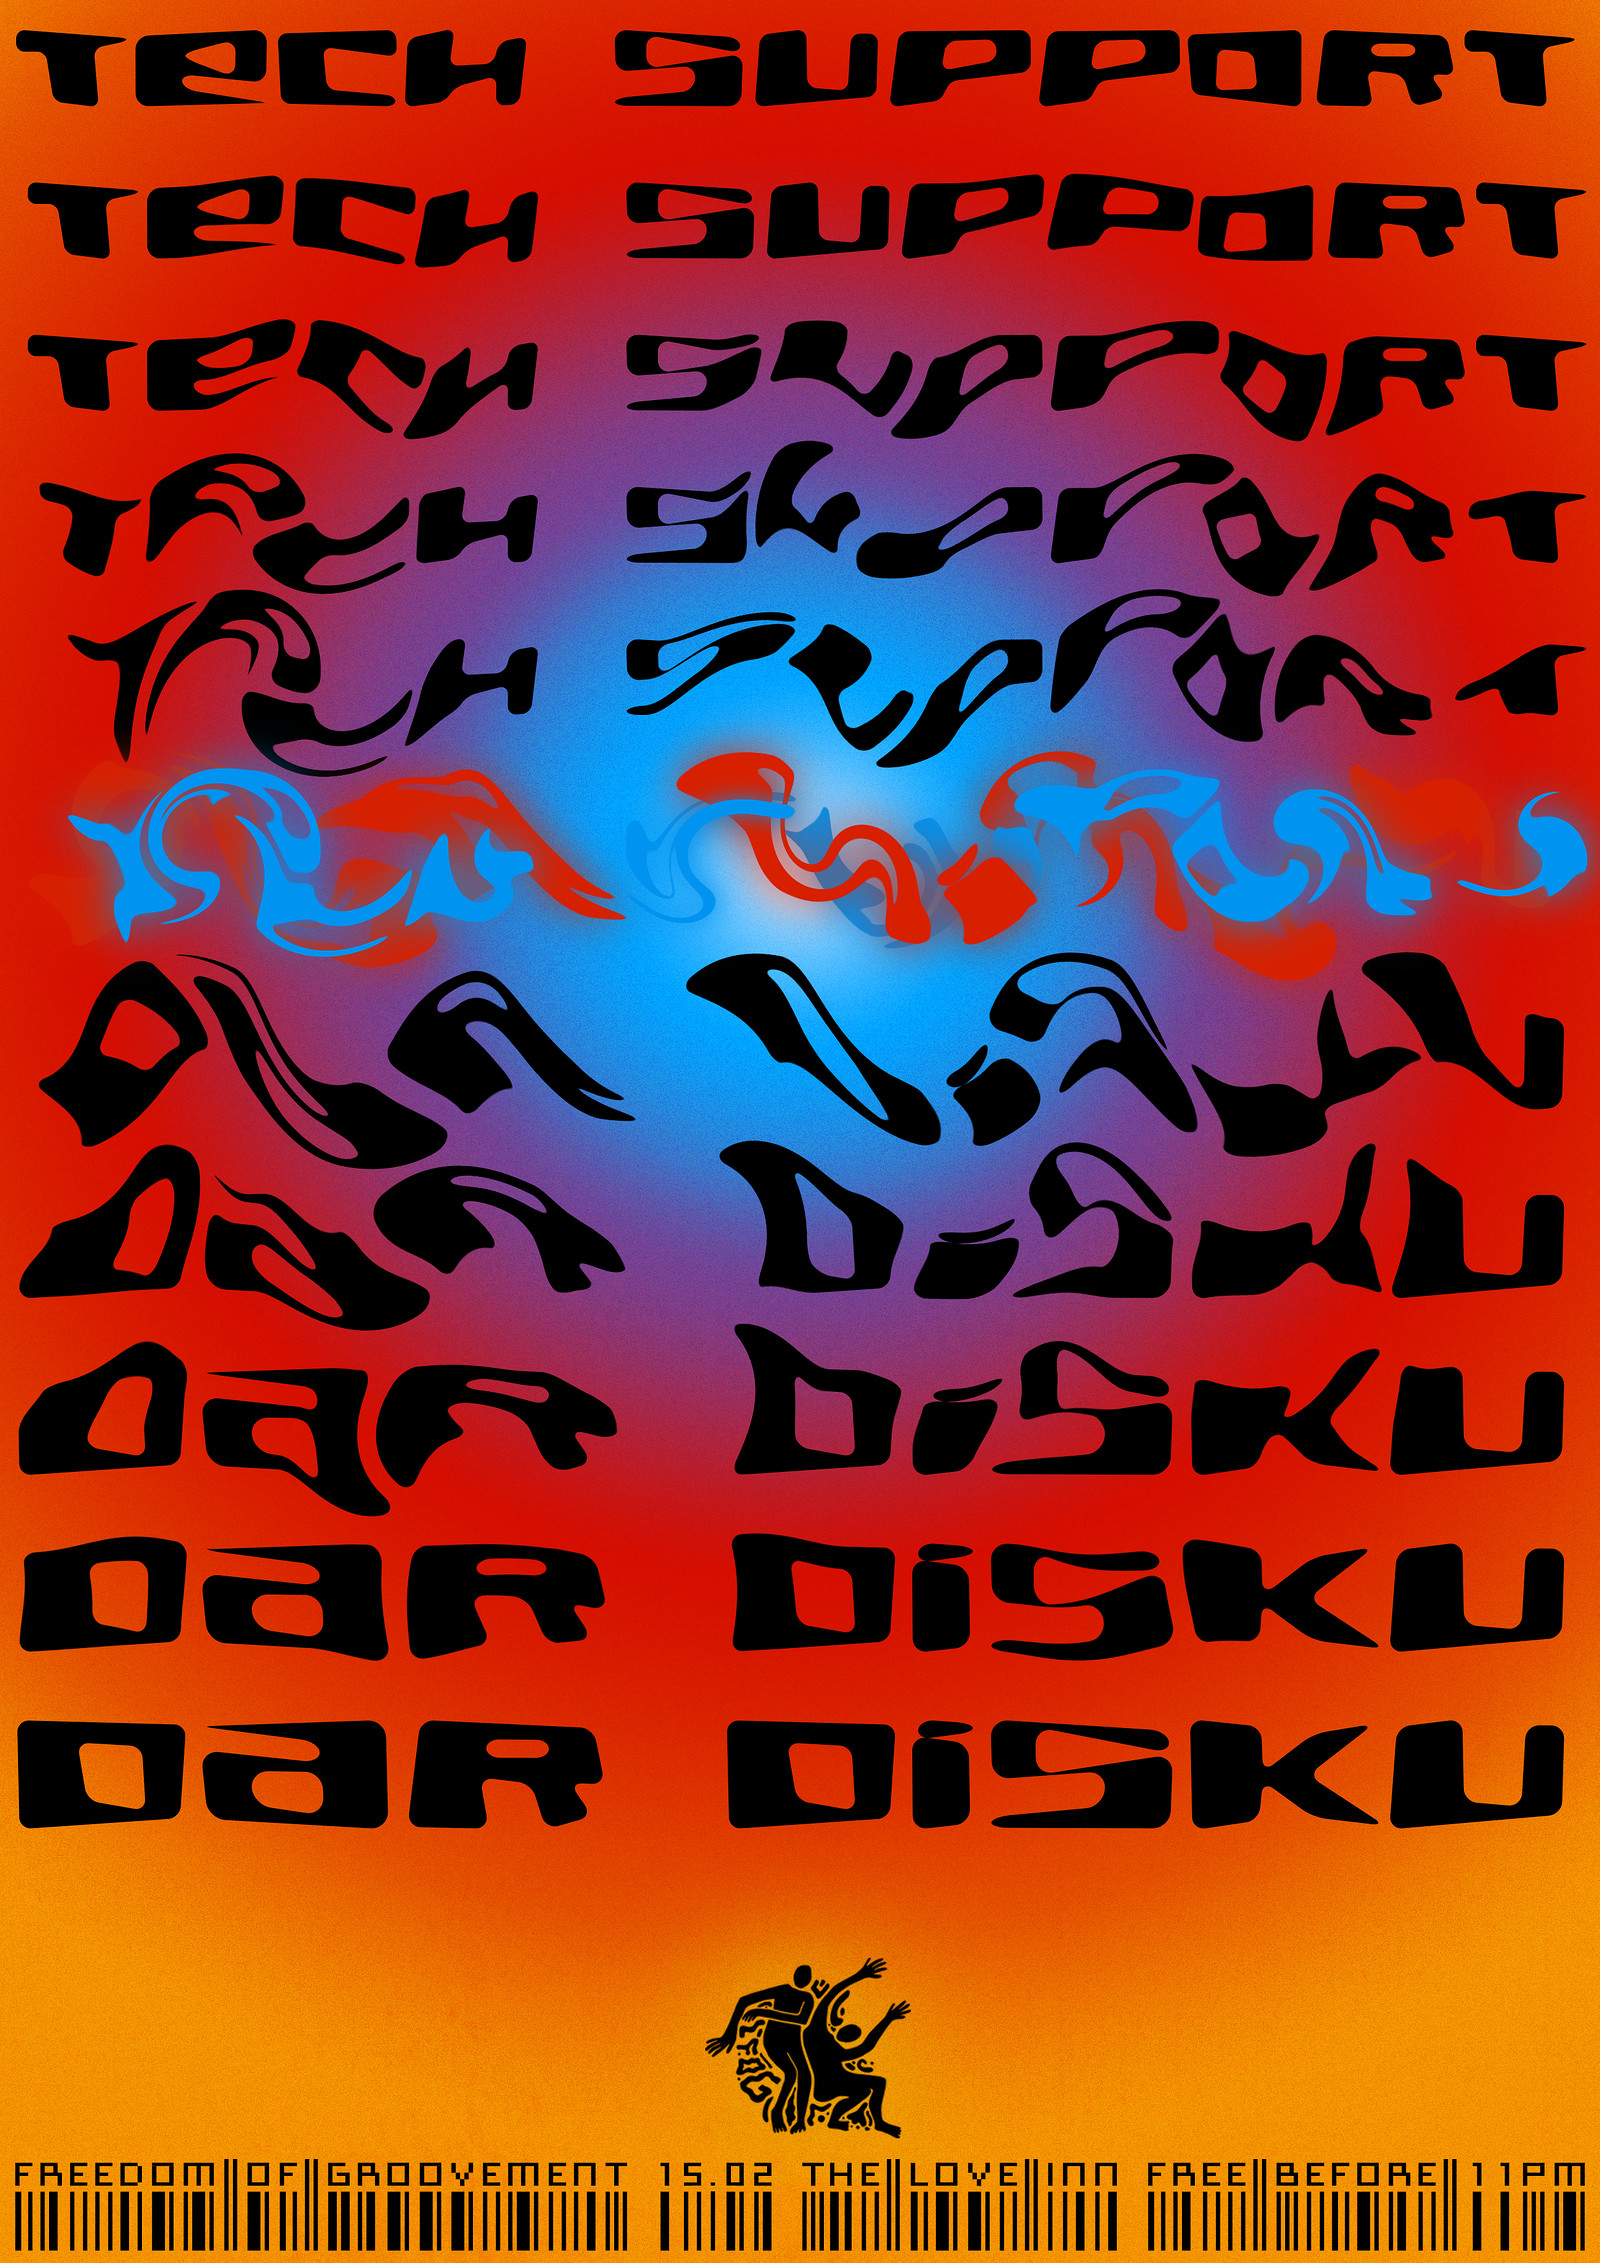 Freedom of Groovement: Tech Support & Dar Disku at The Love Inn